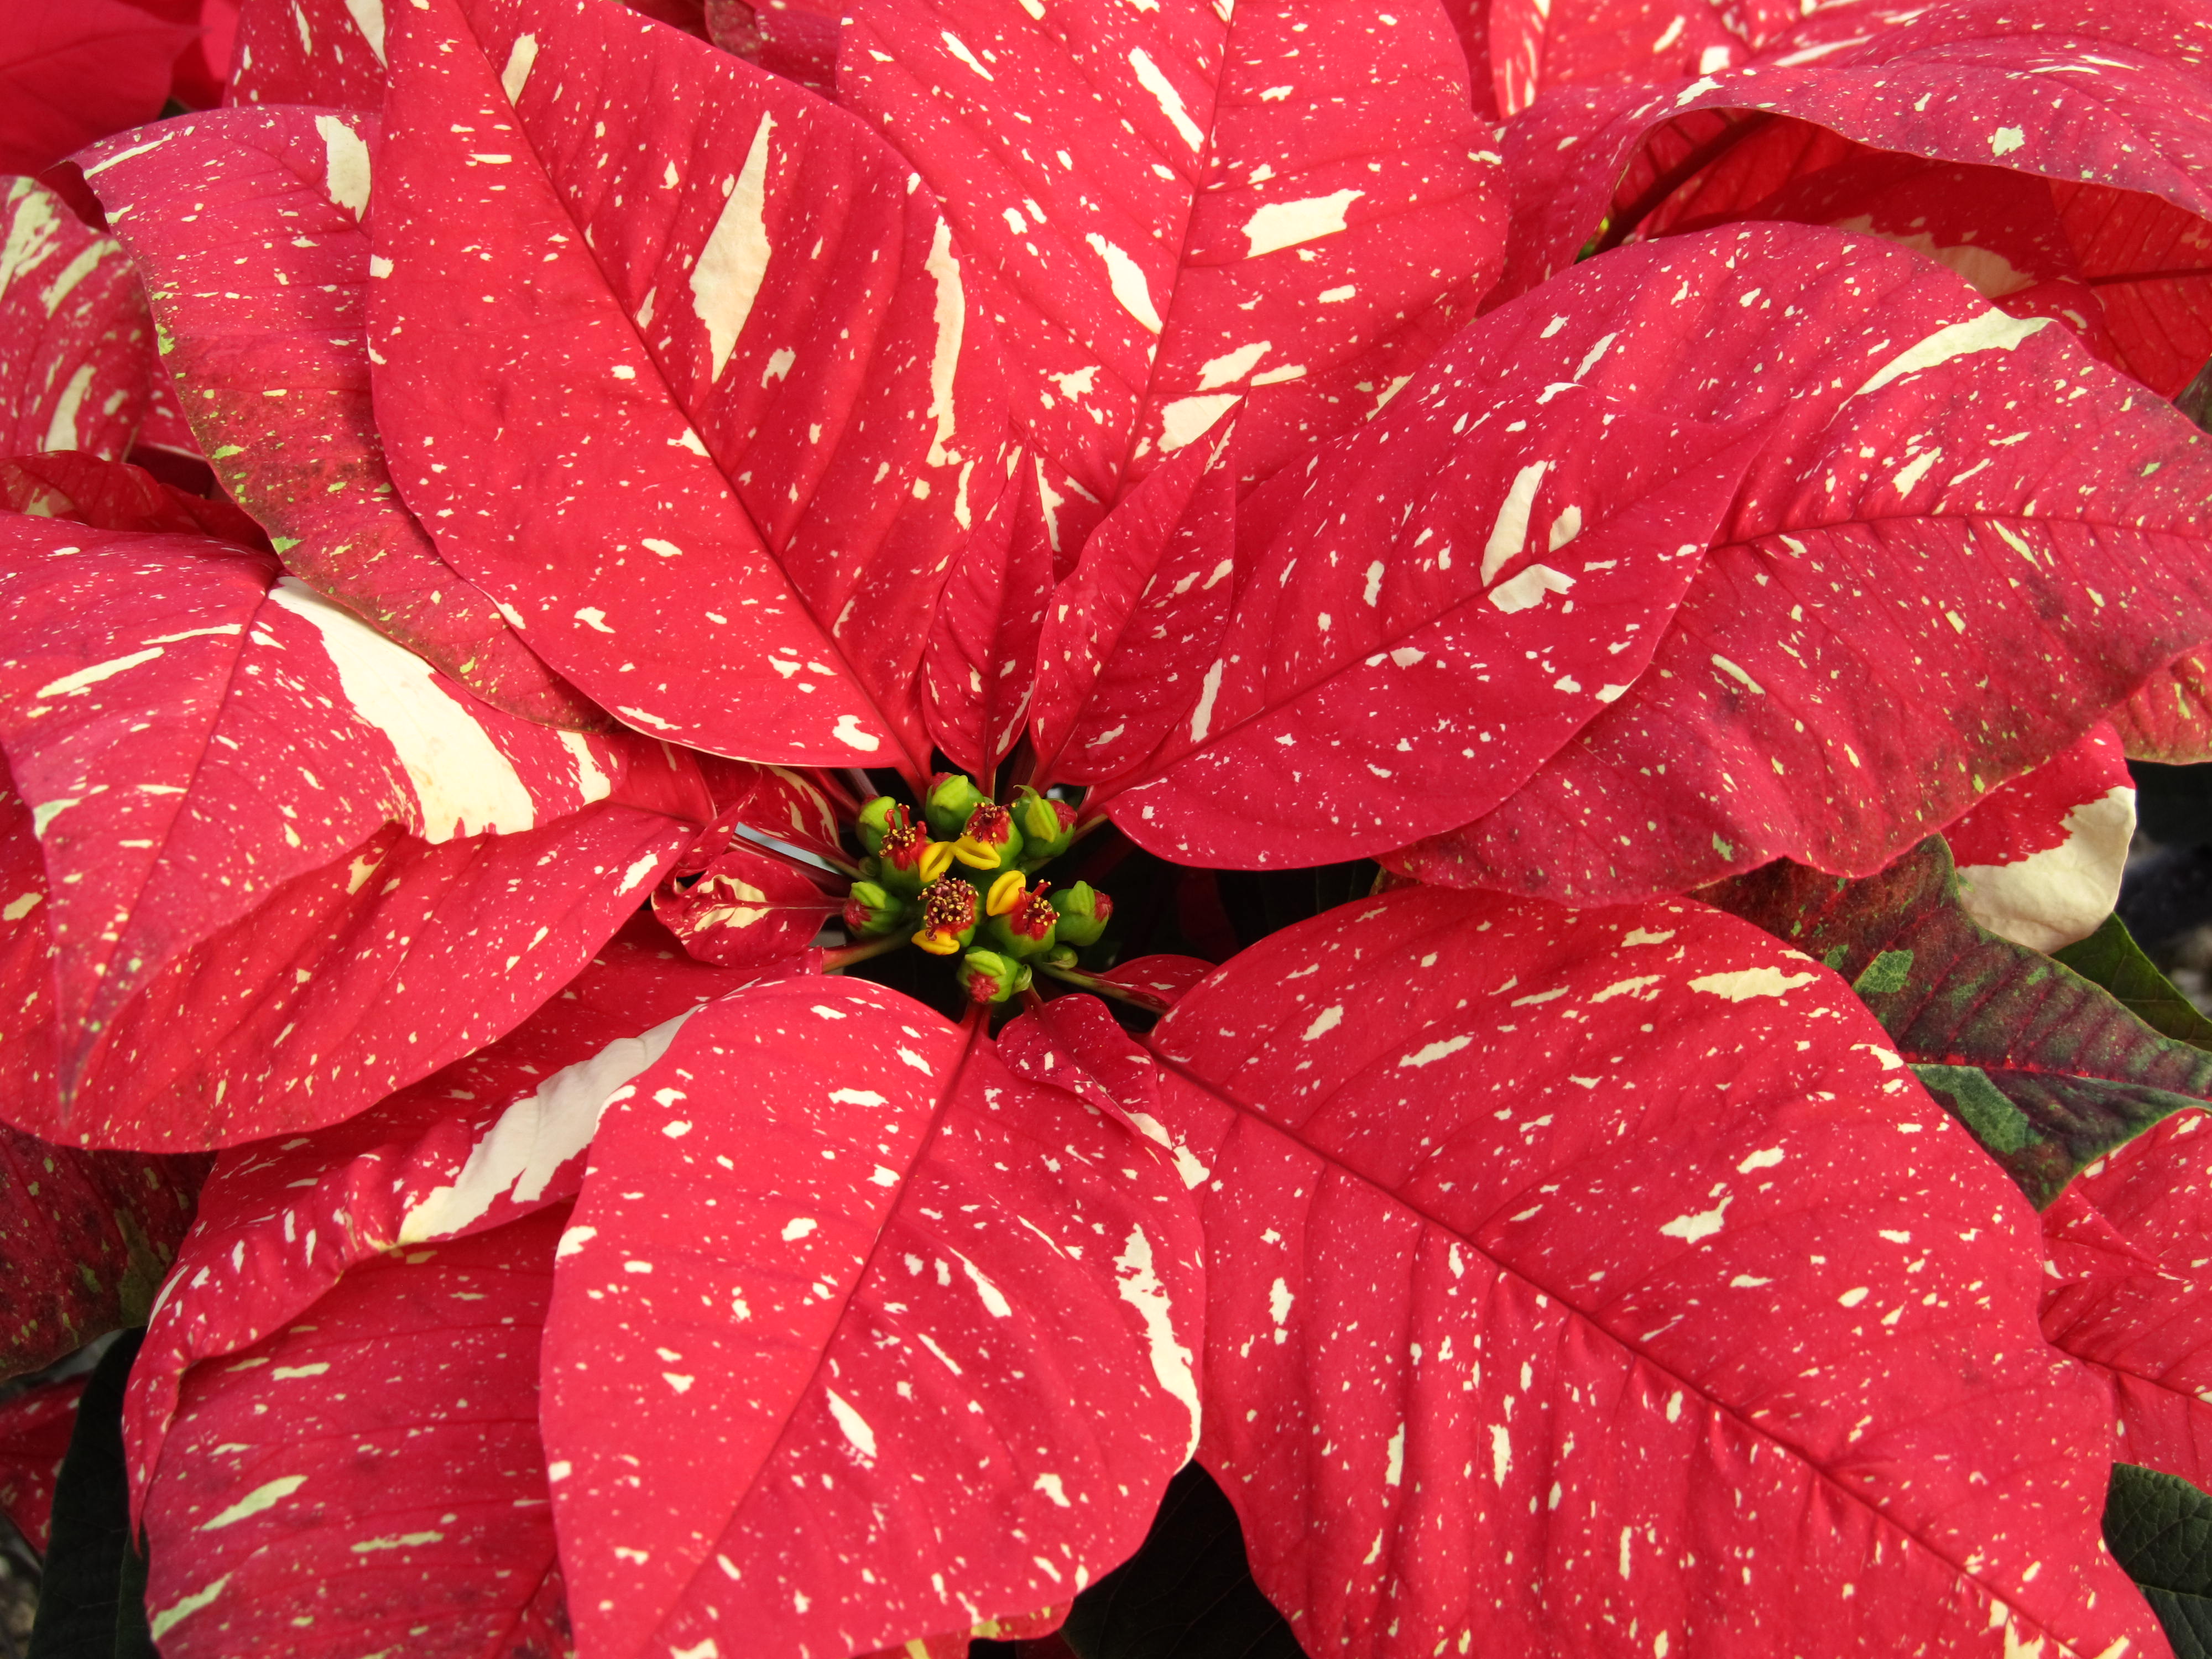 new-poinsettia-varieties-make-your-holidays-bright-what-grows-there-hugh-conlon